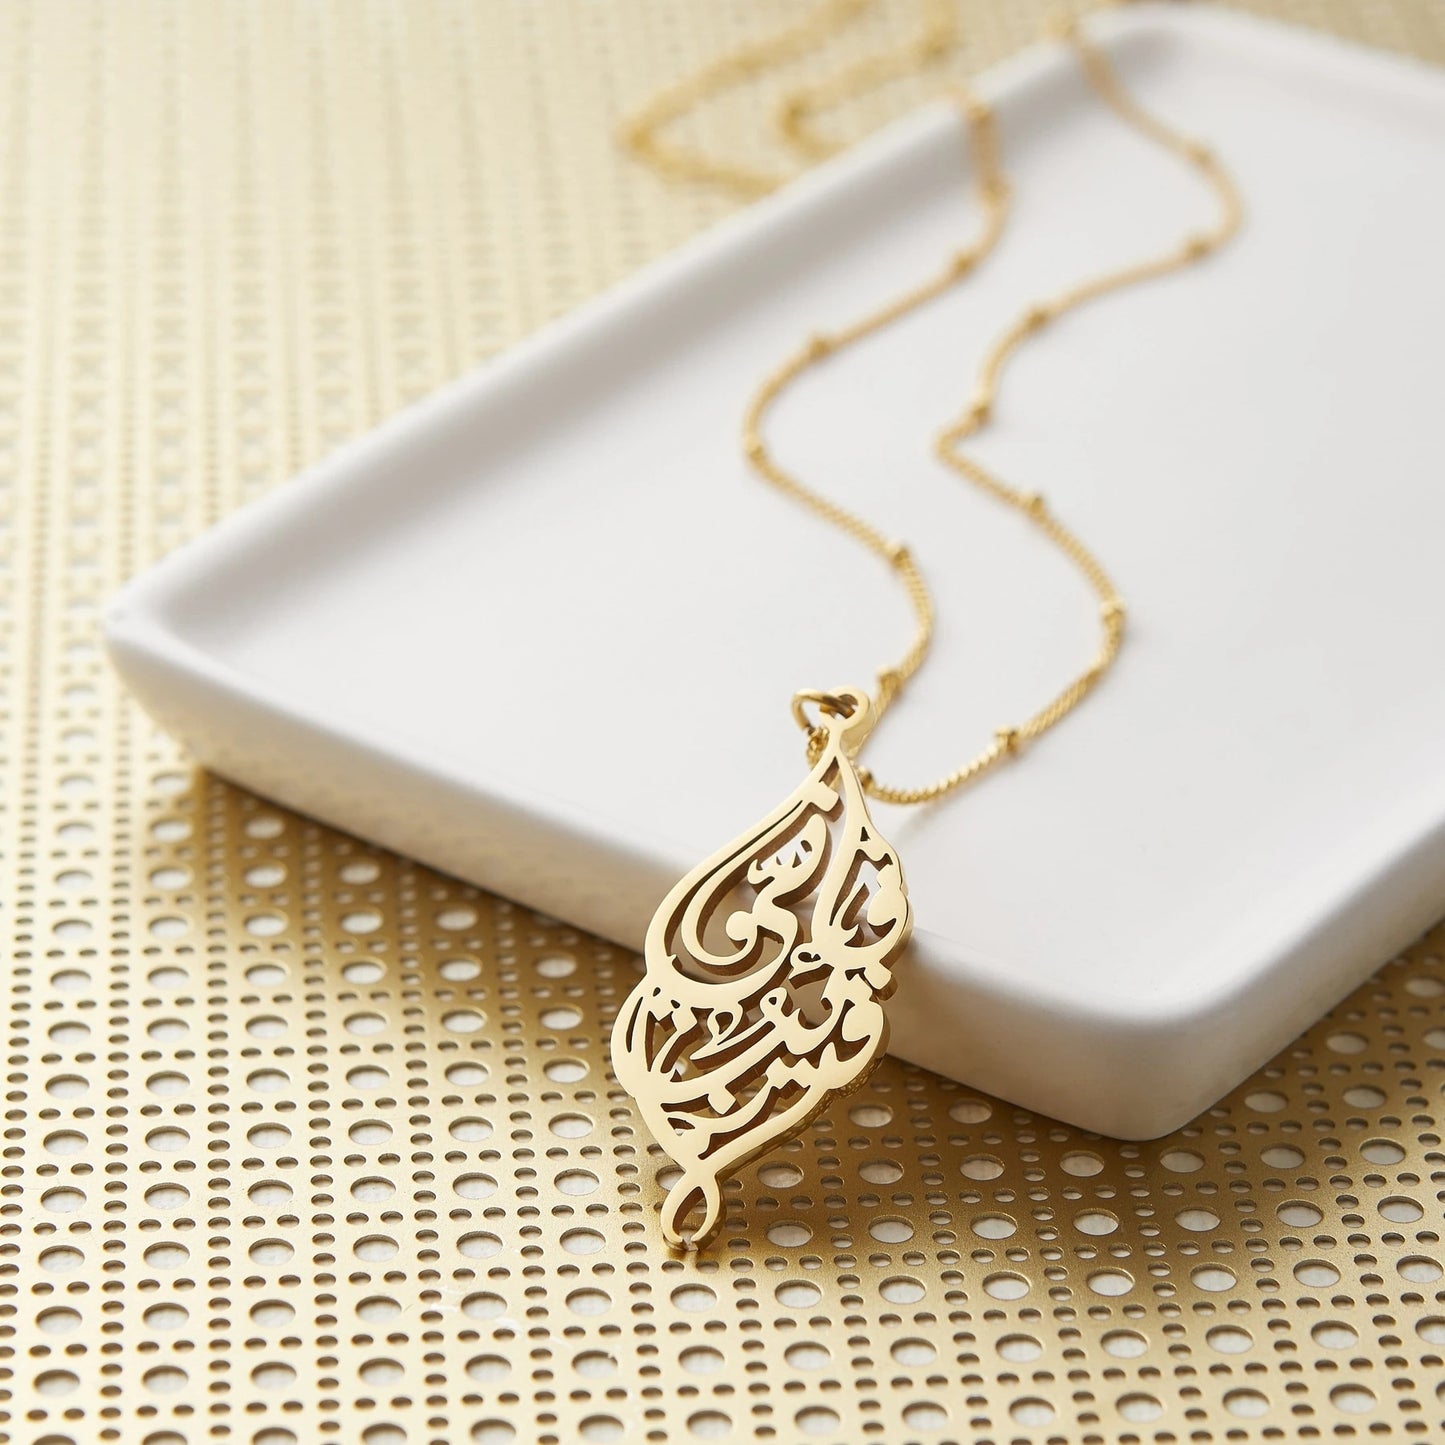 "Indeed, I Am Near" - Calligraphy Necklace